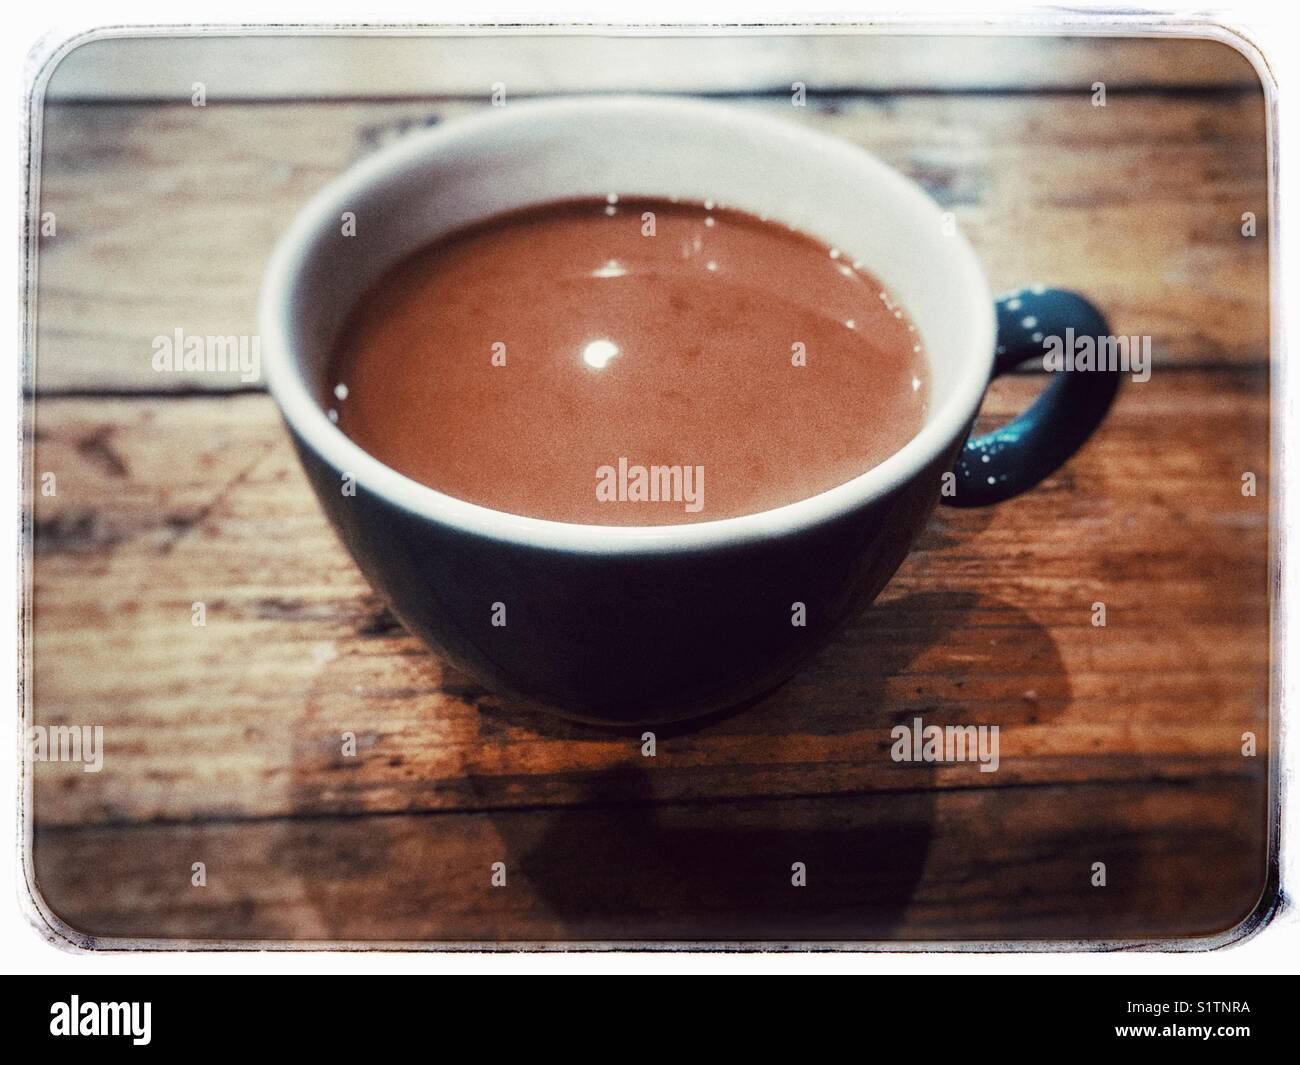 A cup of coffee on a natural wood table. Stock Photo